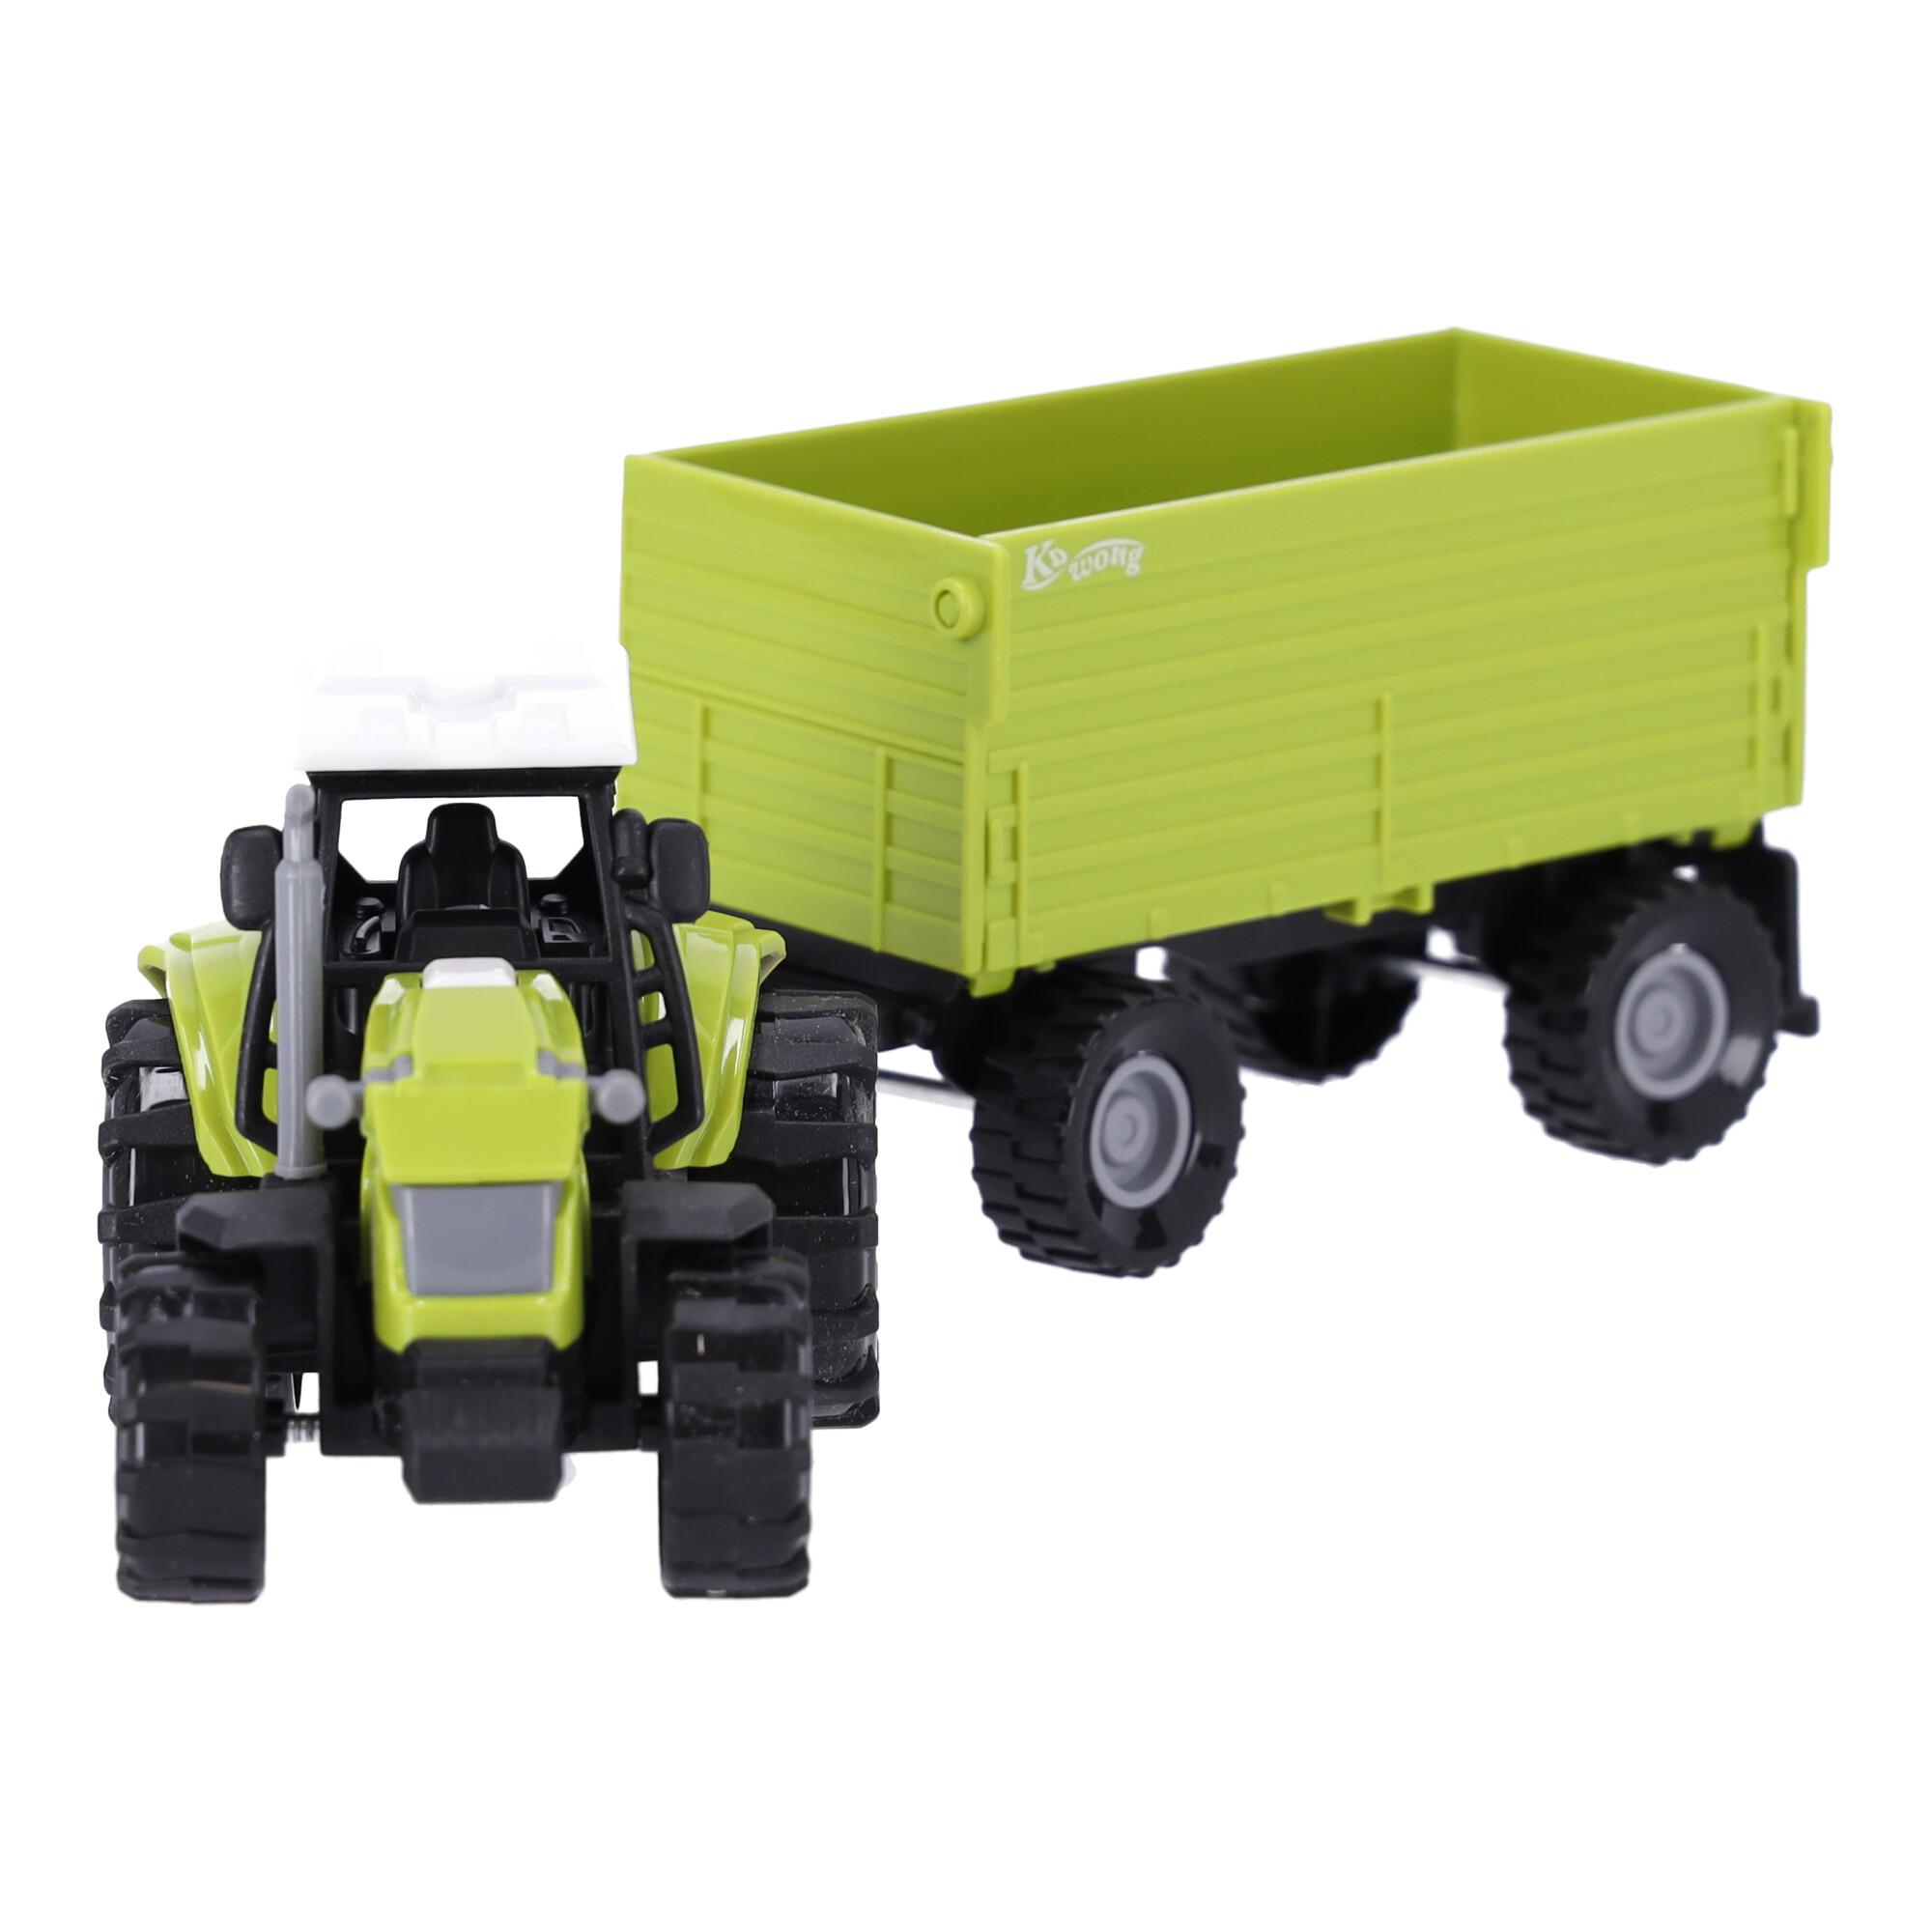 Farmer set - tractor with trailer